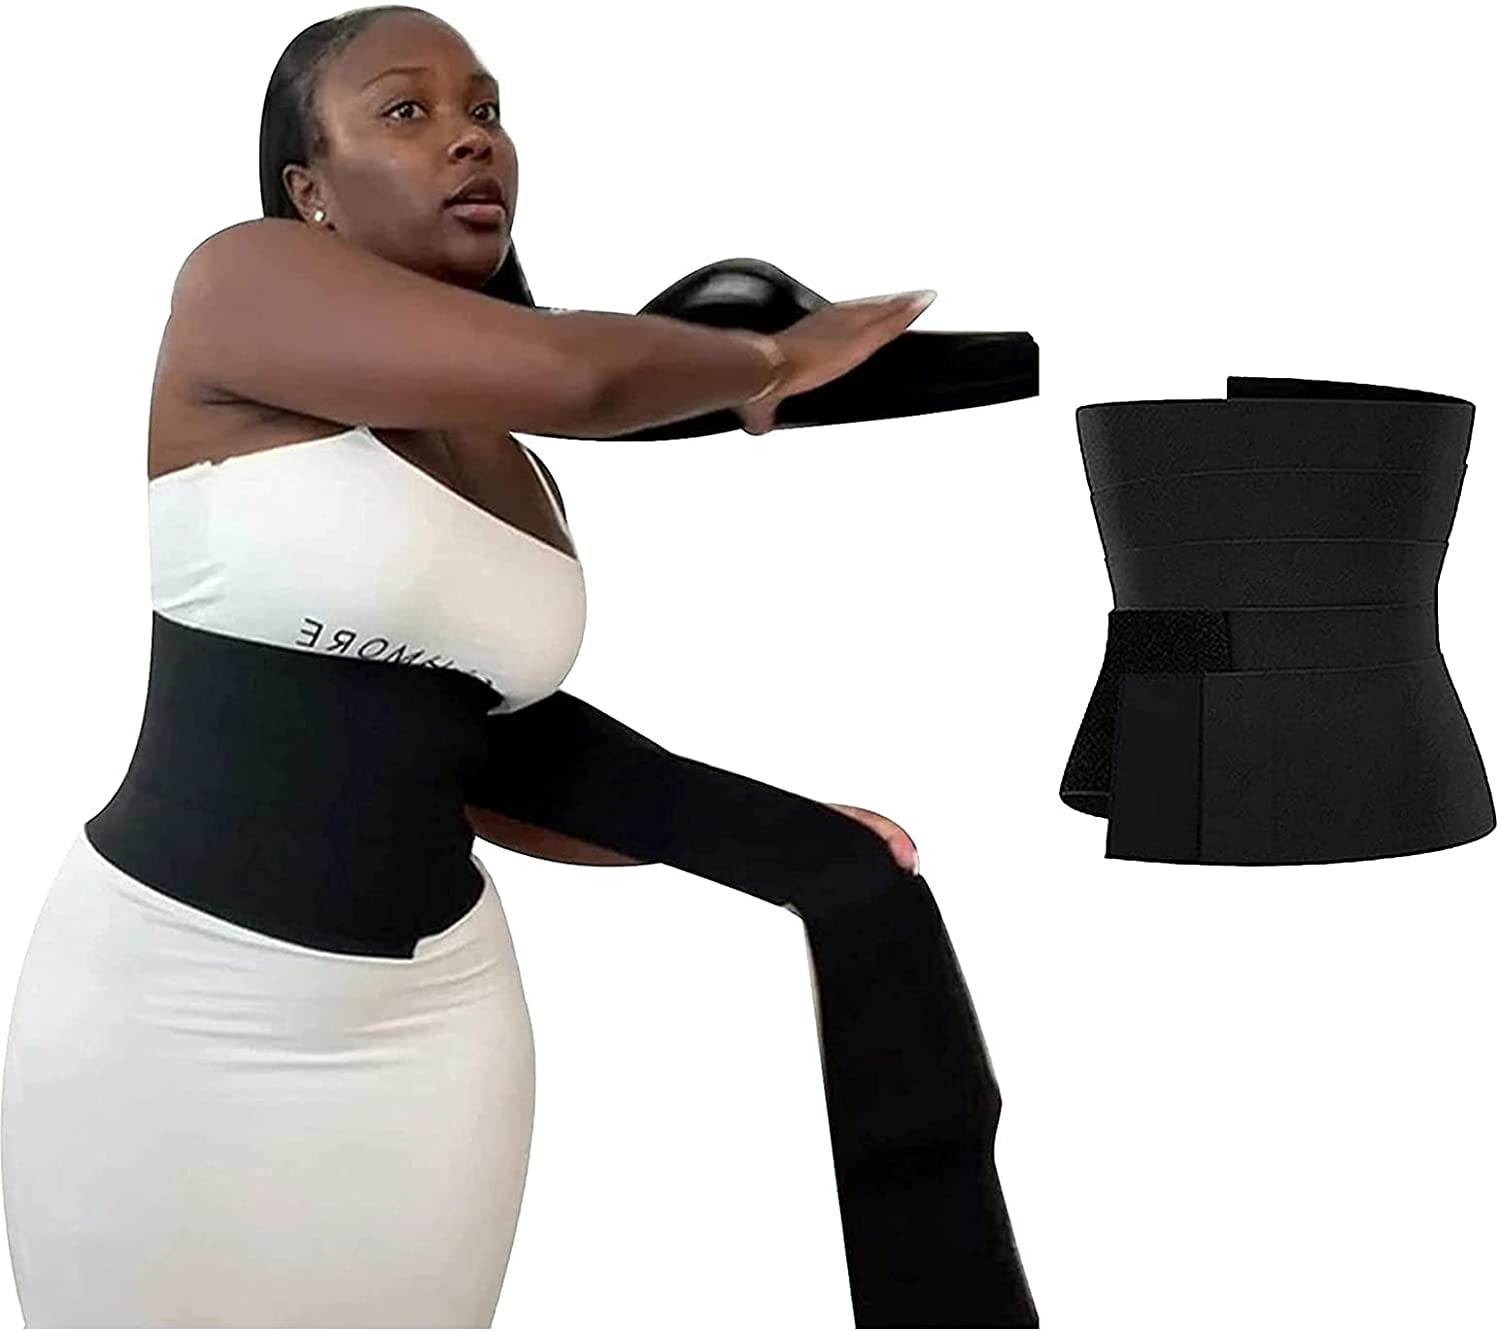 Tiktok Quick Snatch Me Up Bandage Wrap Lumbar Waist Support Belt,Adjustable Invisible Wrap Waist Trainer Tape for Lower Back Pain Relief and Body Shaping Black 